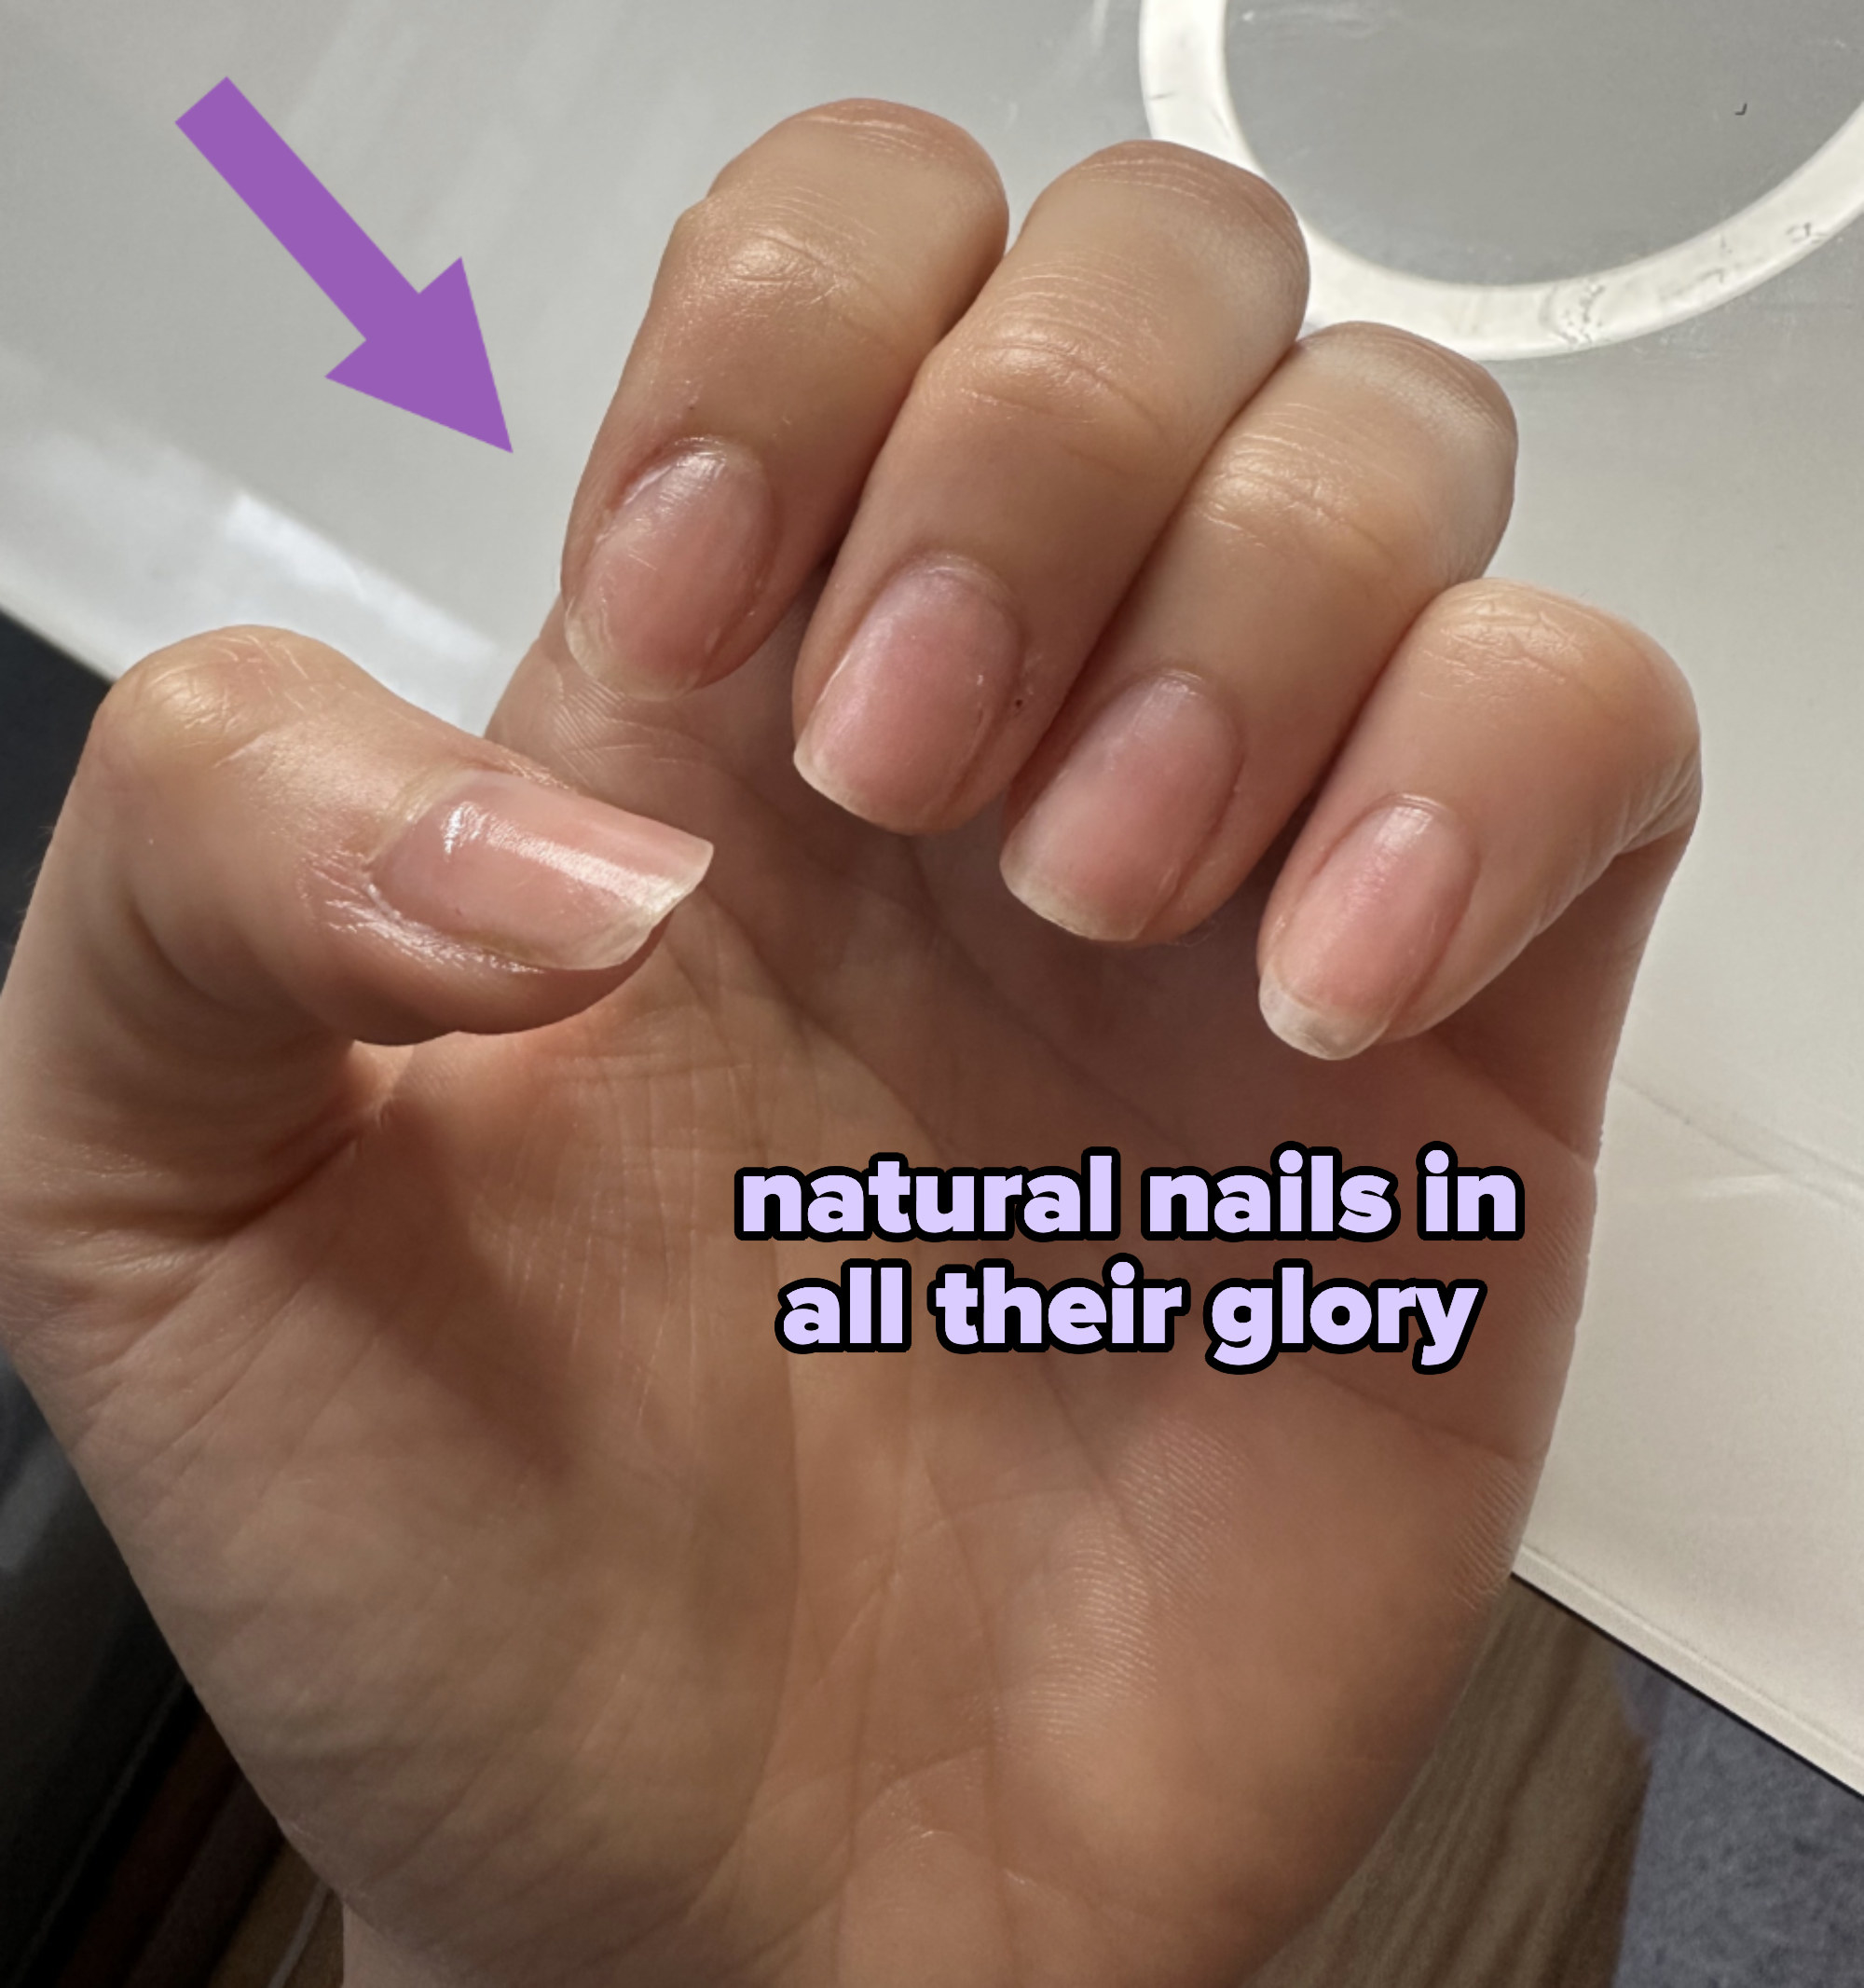 Your Complete Guide to Healthy Nails | Grazia India